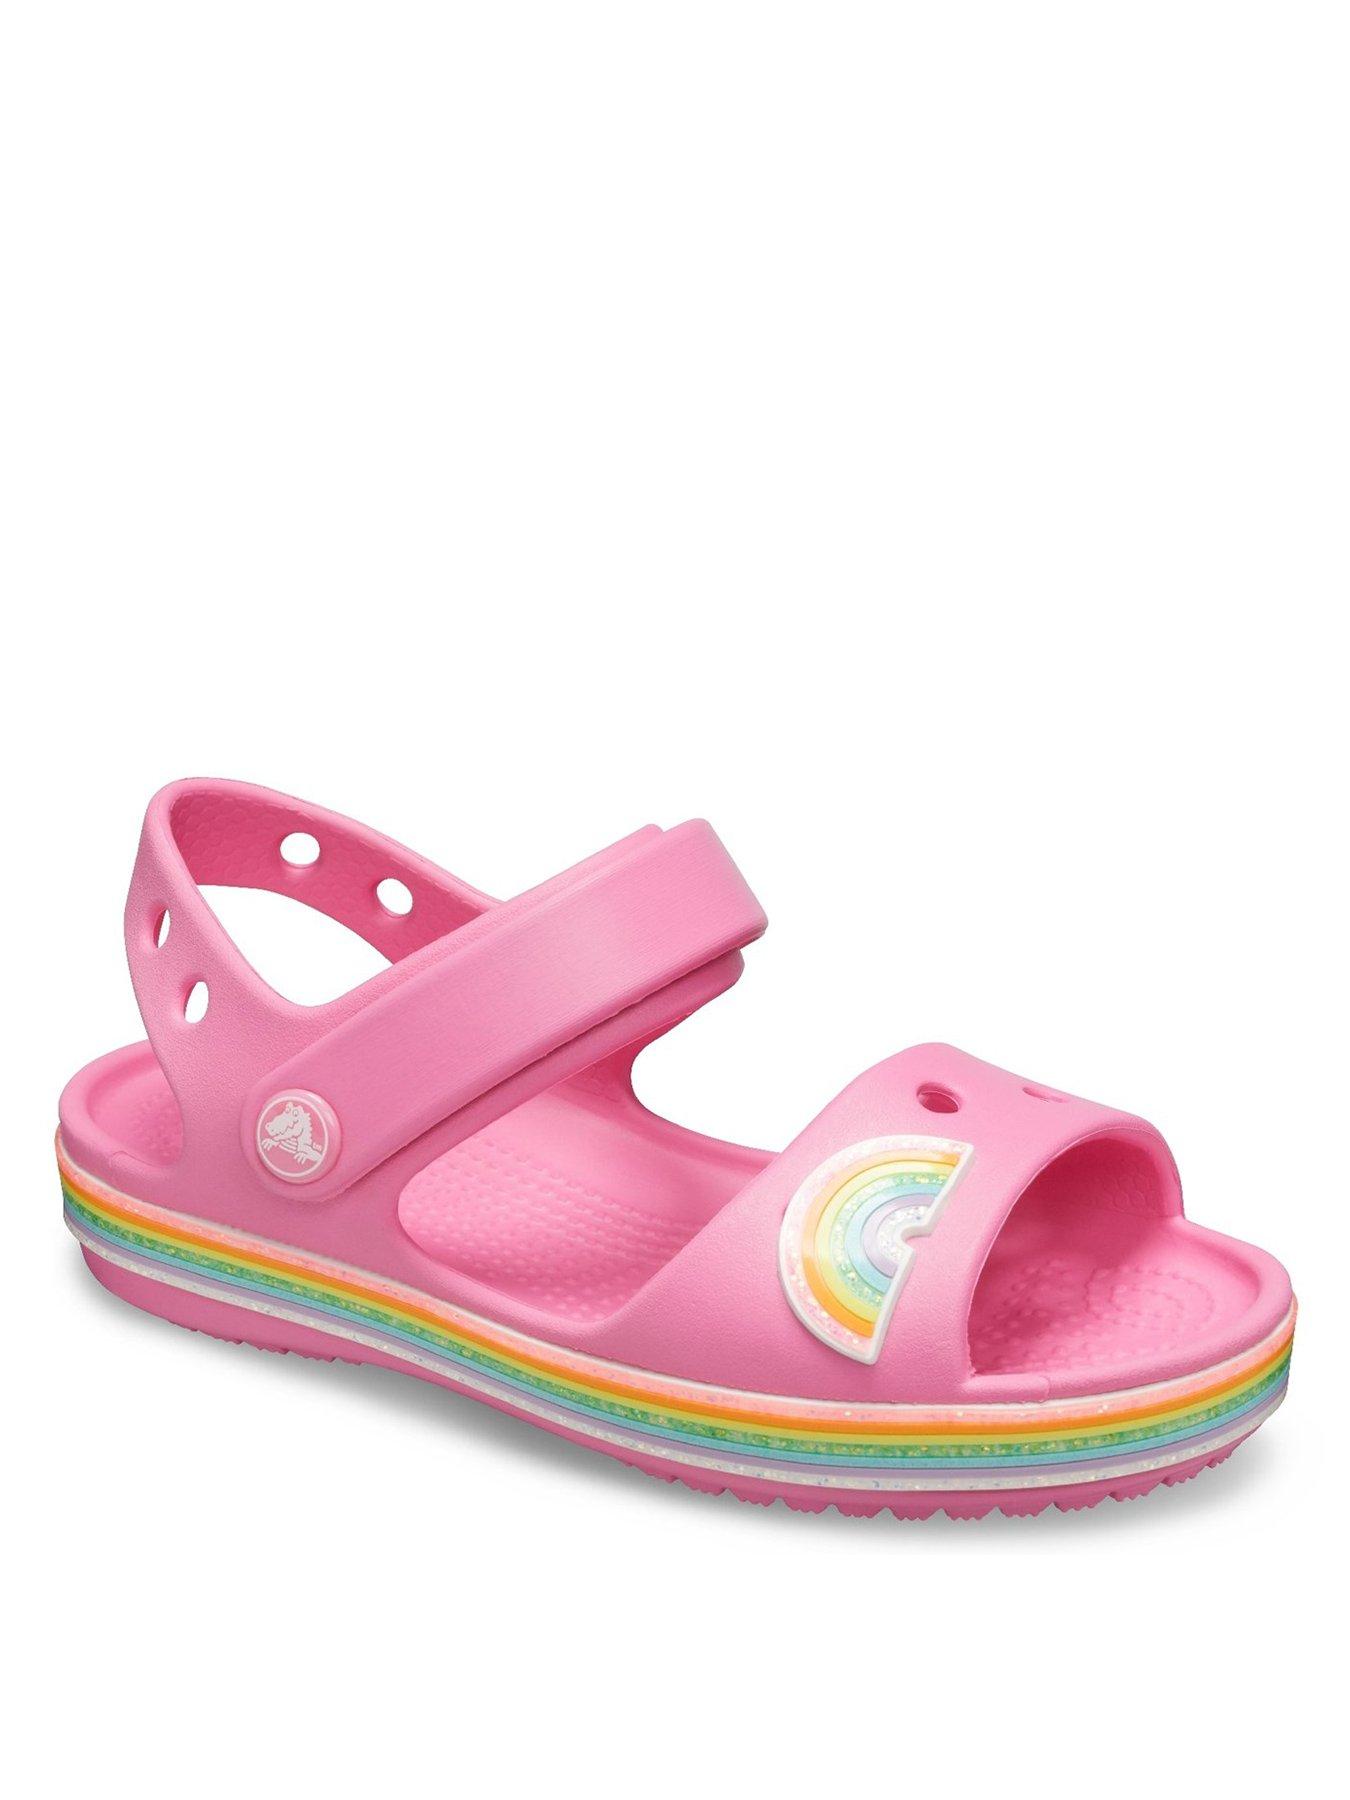 crocs sandals for toddlers